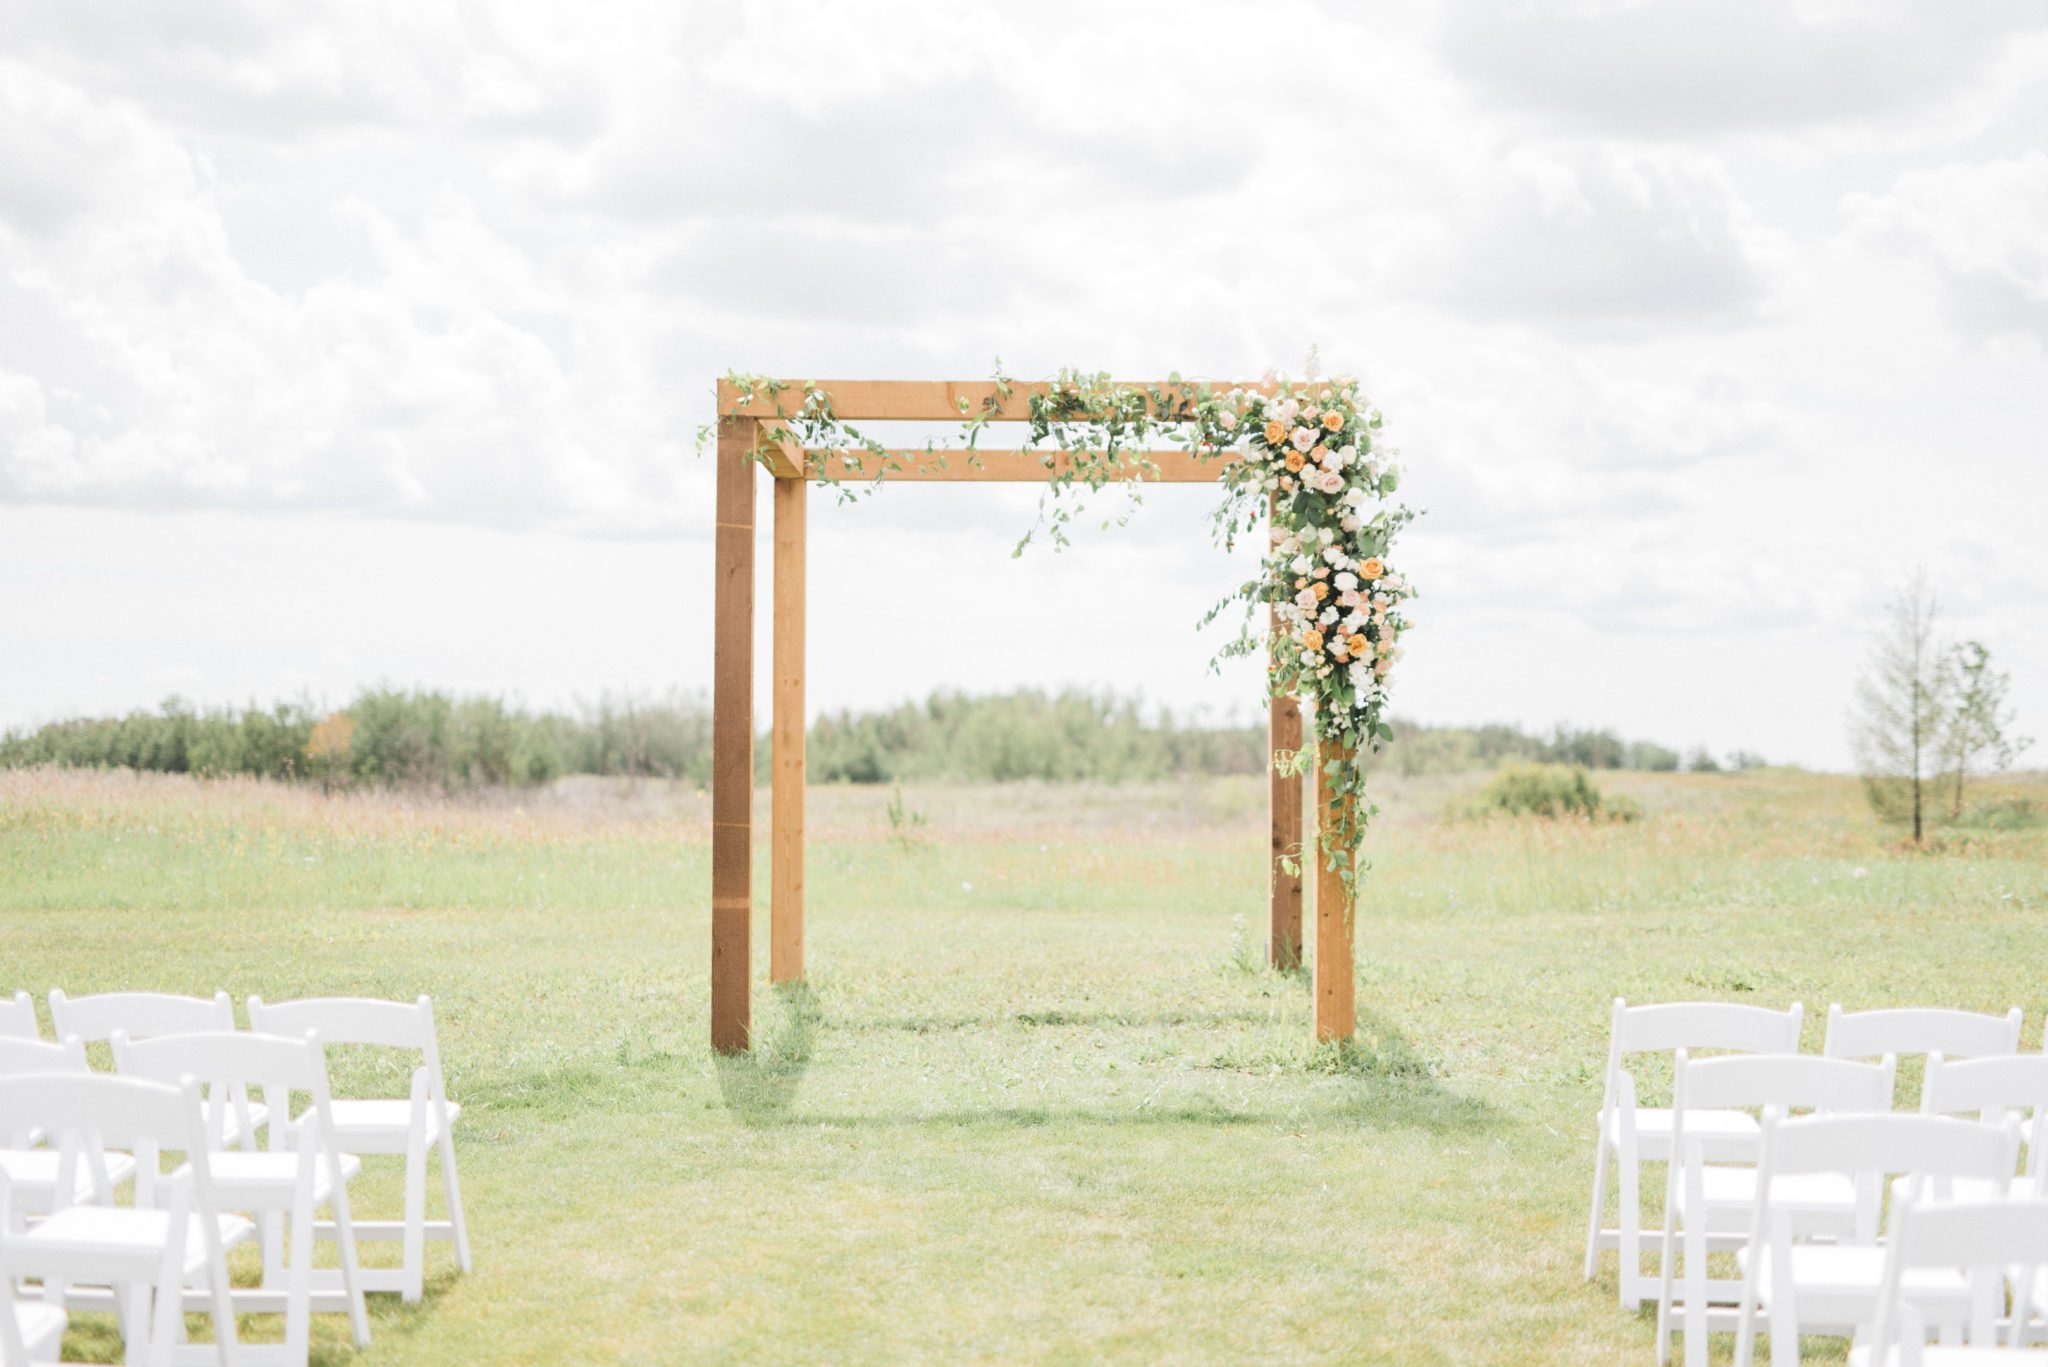 Timeless Details in Cream and Peach in this Classic Wedding at The Barn at Wind's Edge